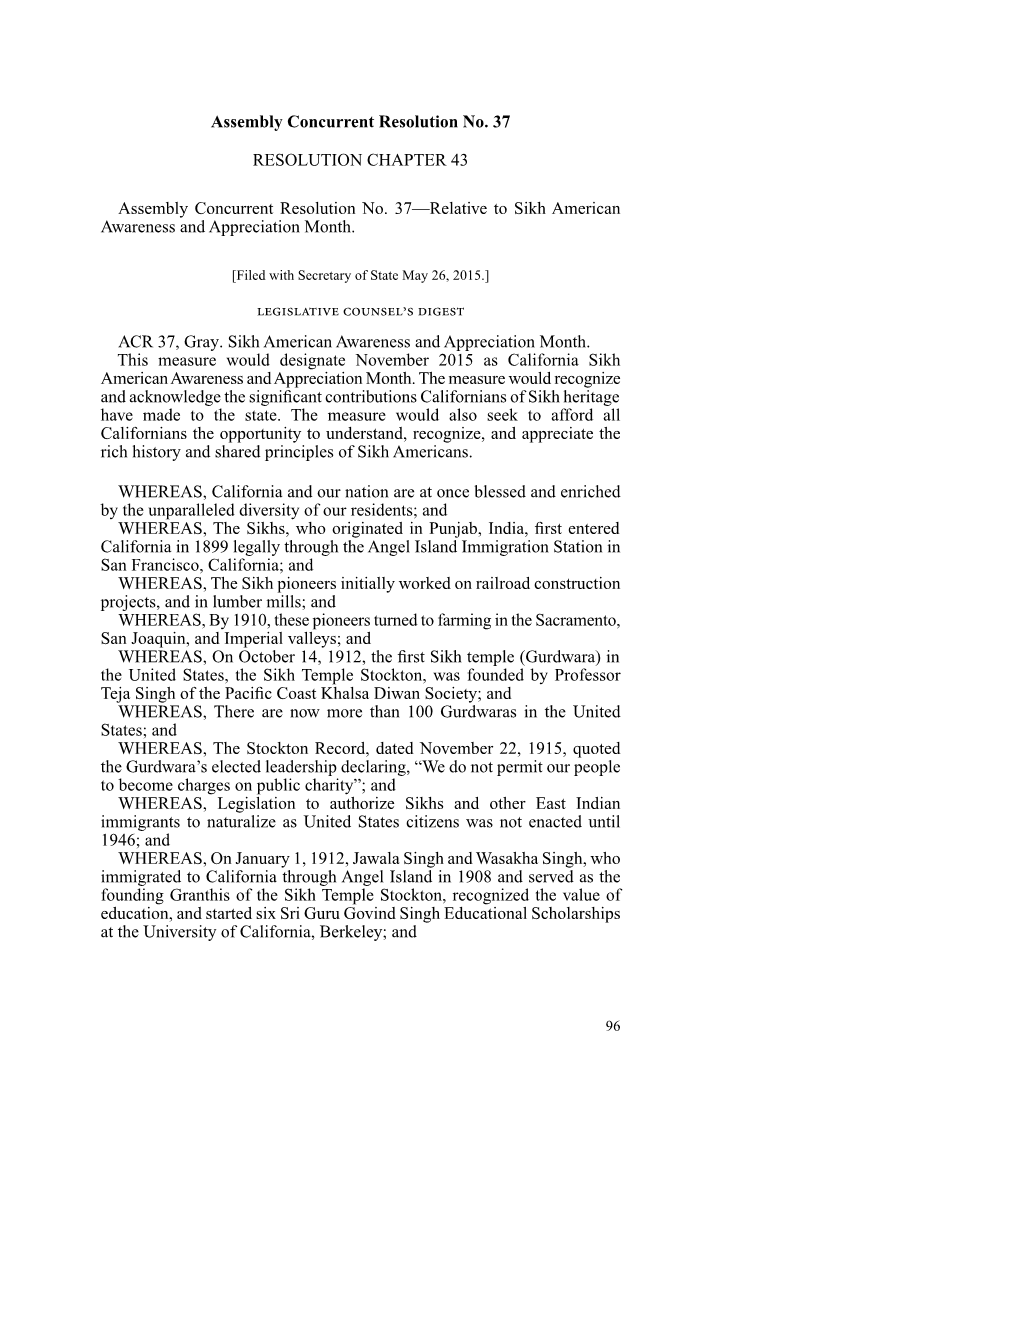 Assembly Concurrent Resolution No. 37 RESOLUTION CHAPTER 43 Assembly Concurrent Resolution No. 37—Relative to Sikh American Aw